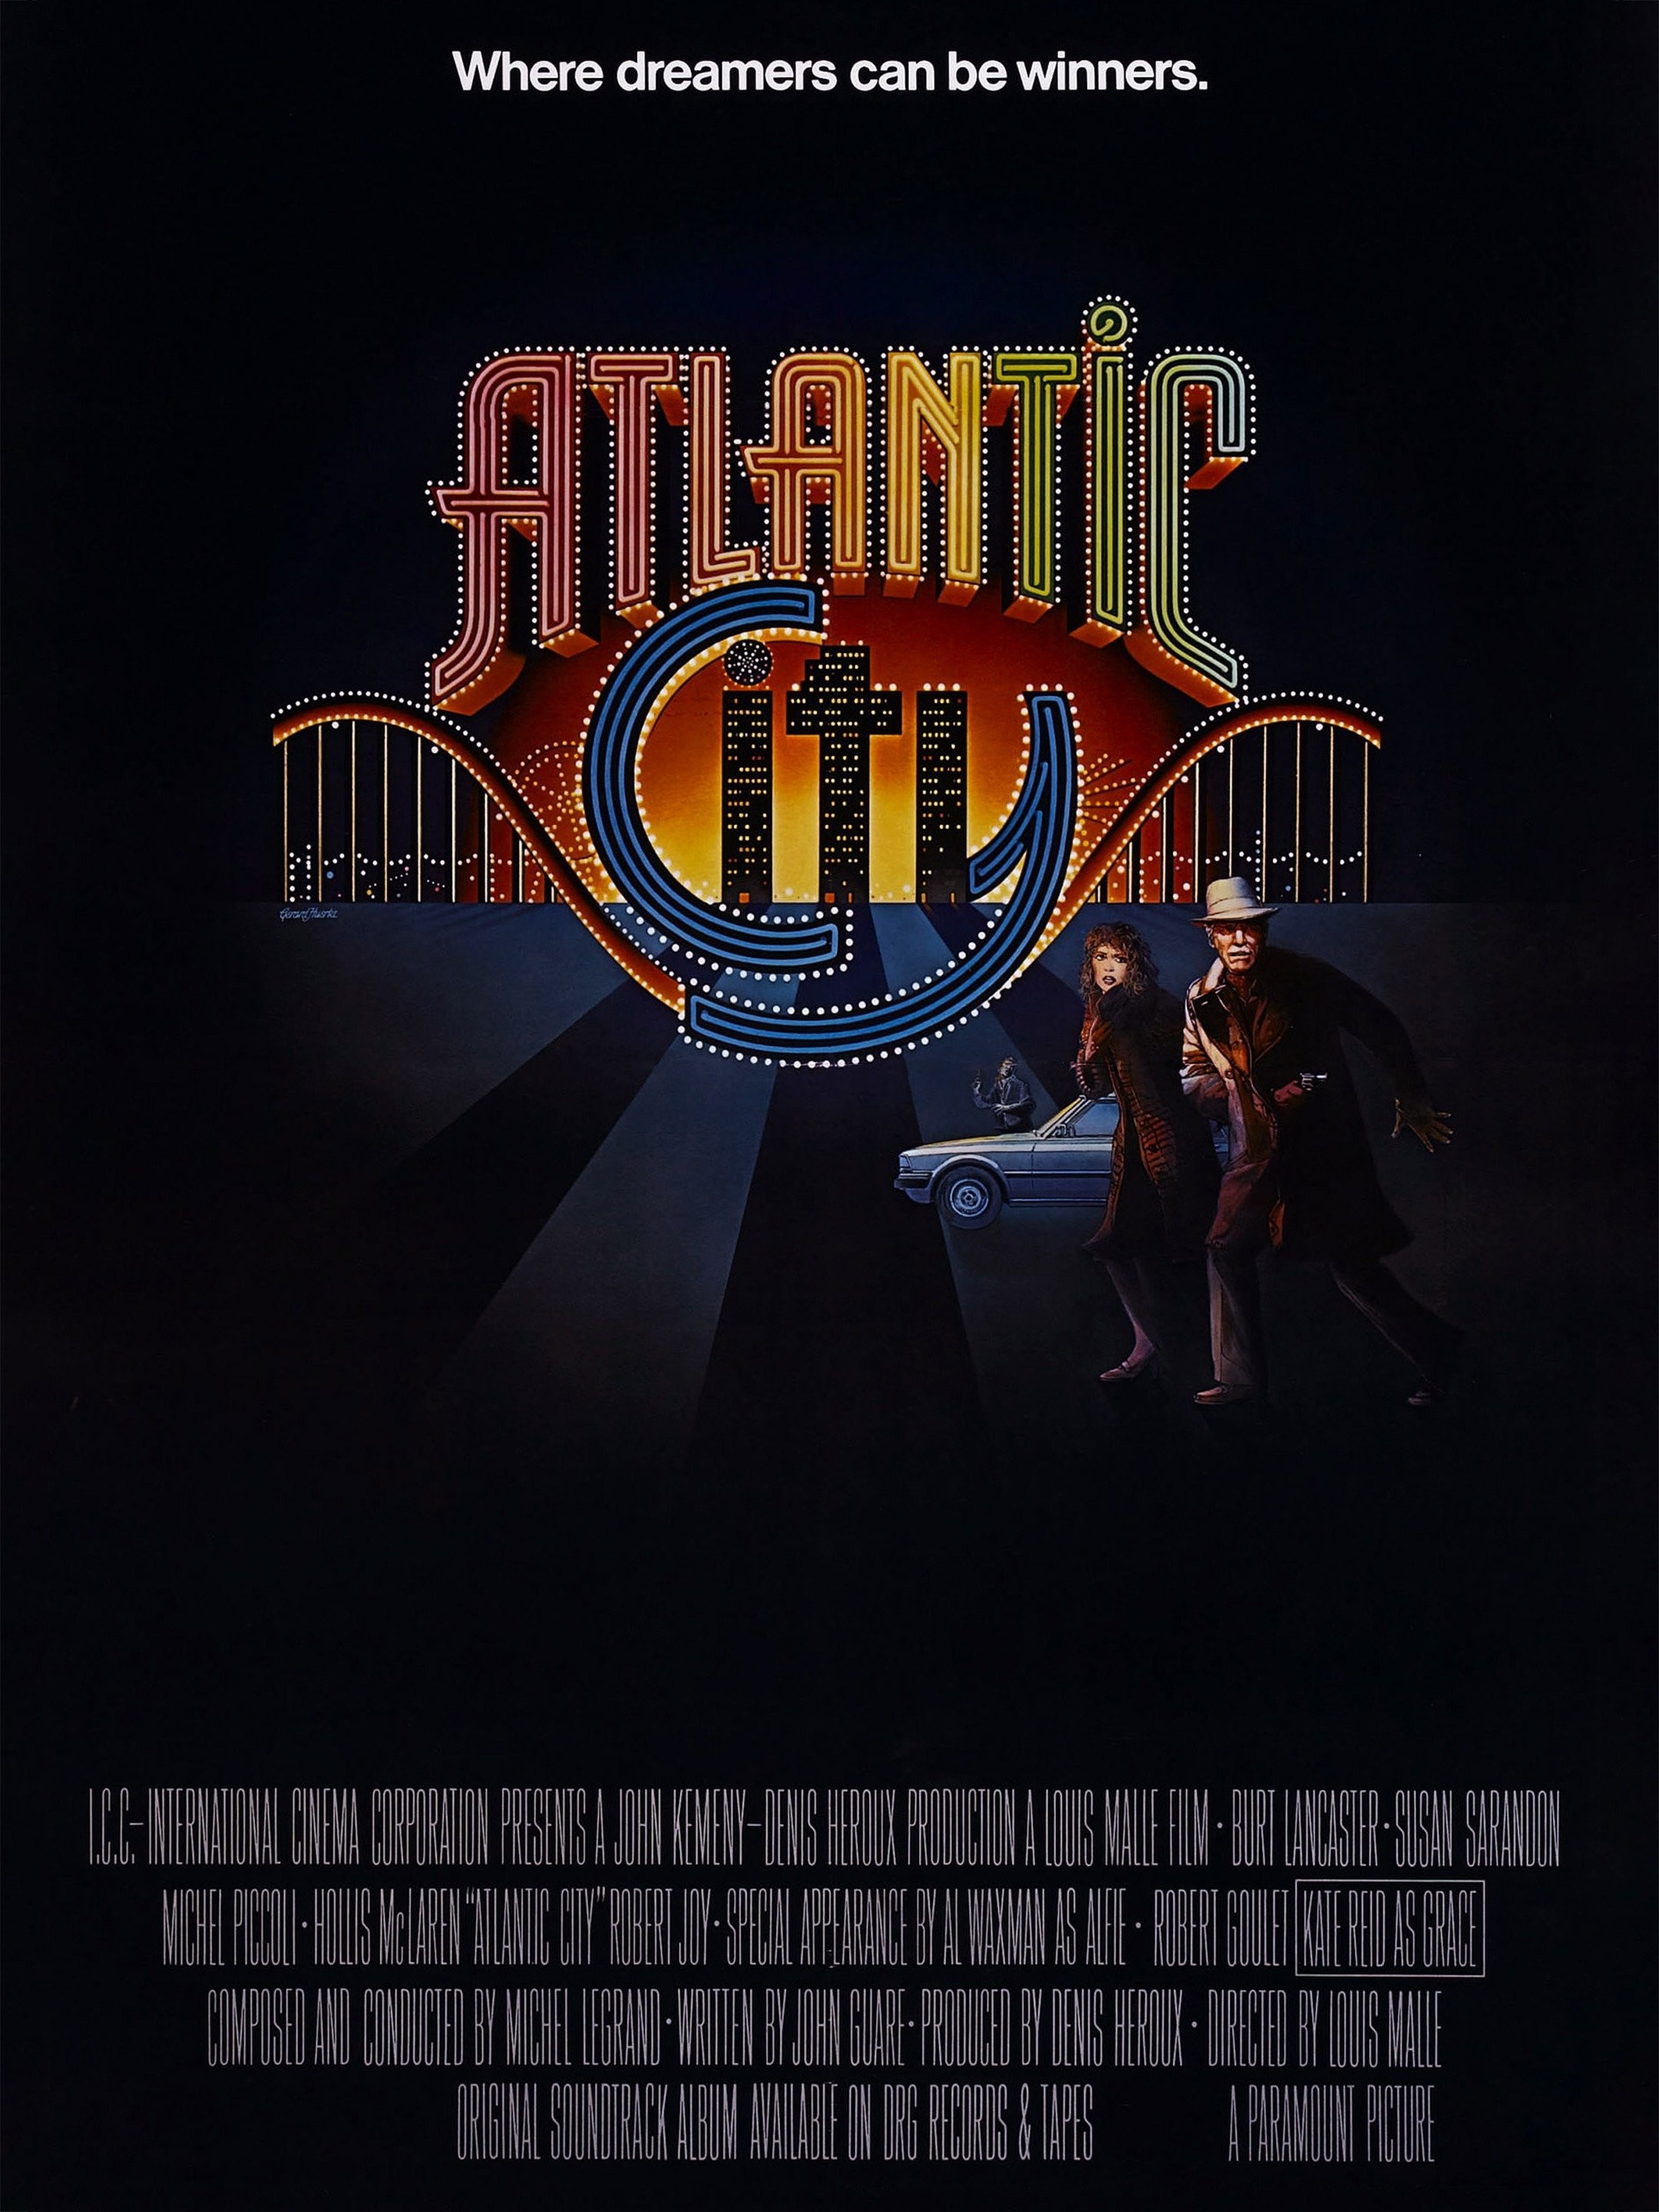 Experience The Ultimate Sexual Fantasy With Atlantic City's